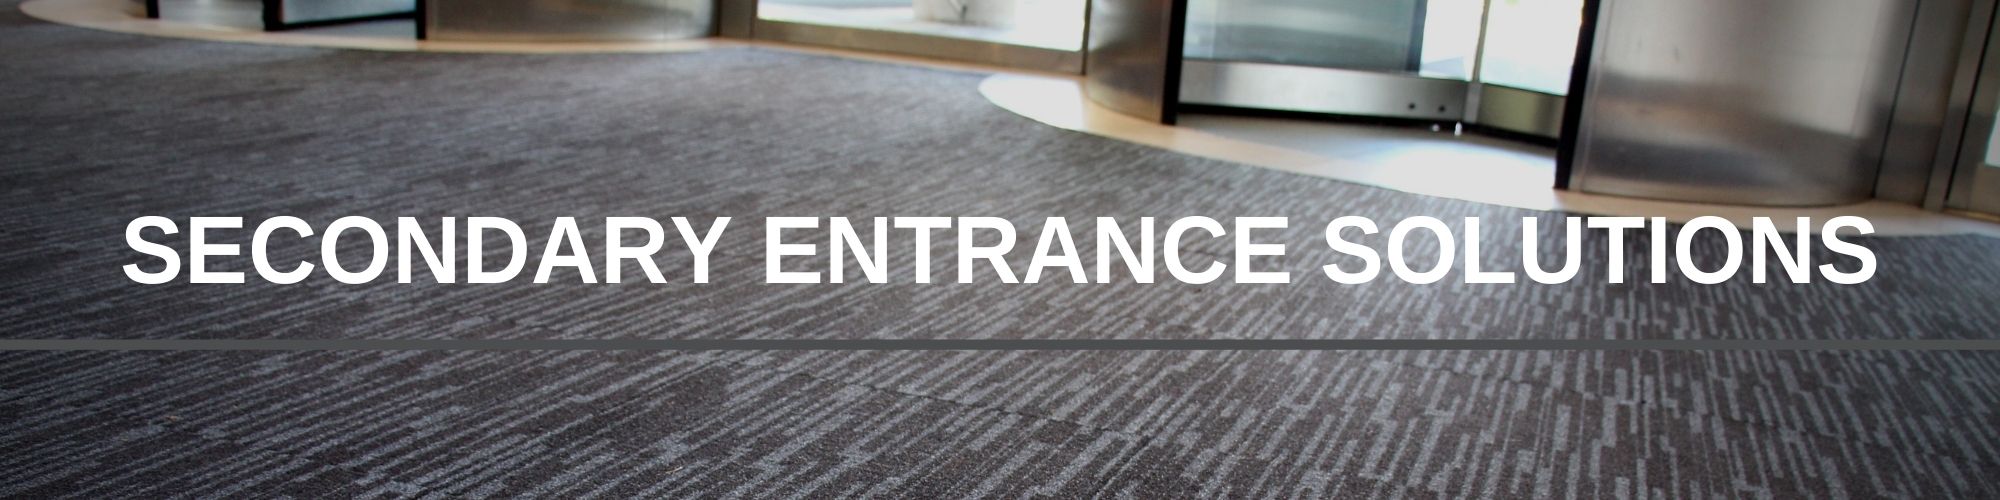 Secondary Entrance Solutions | Mat.Works Entrance Solutions | Entrance Matting